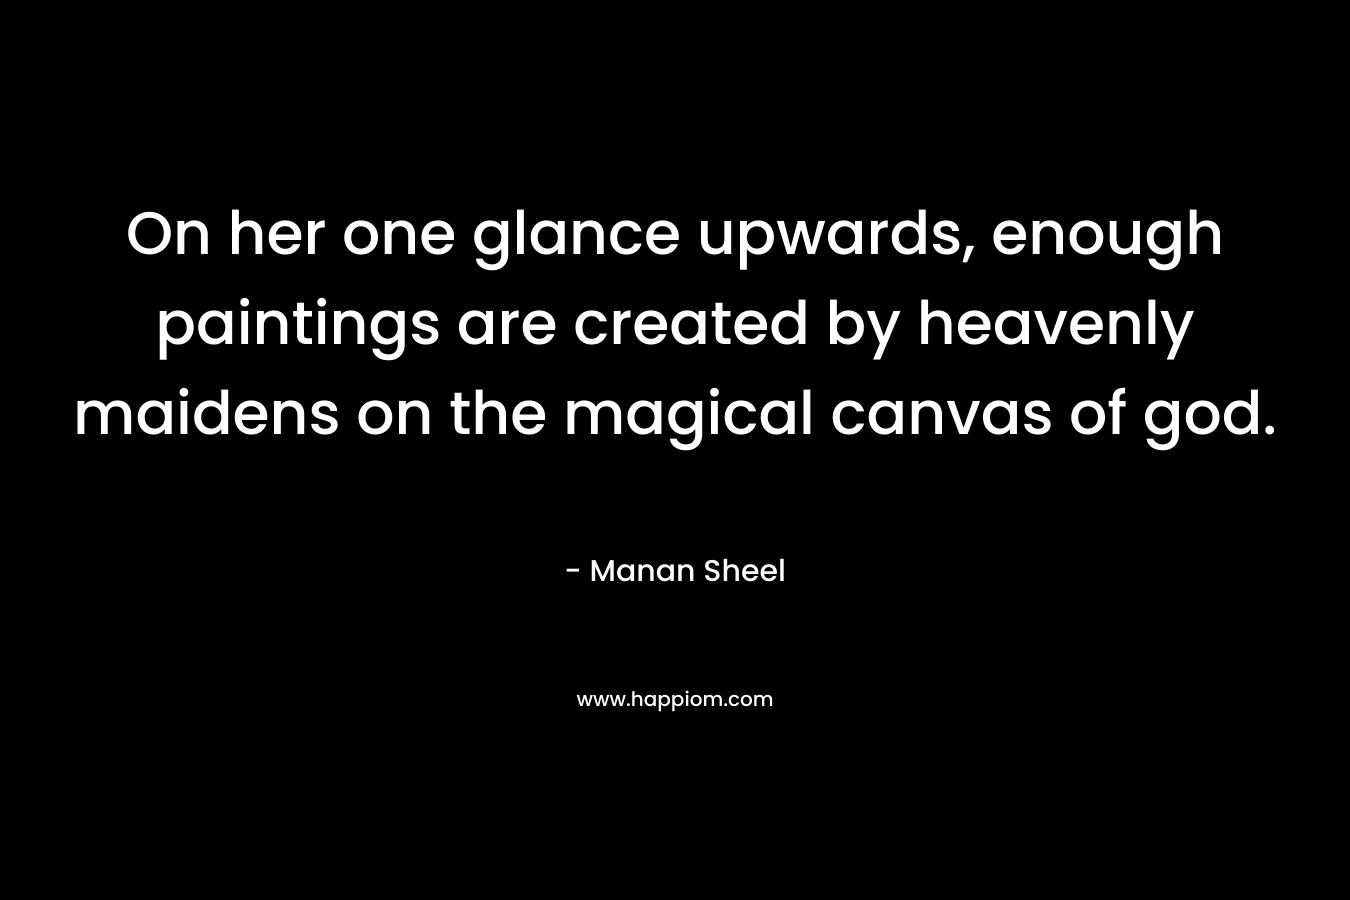 On her one glance upwards, enough paintings are created by heavenly maidens on the magical canvas of god. – Manan Sheel